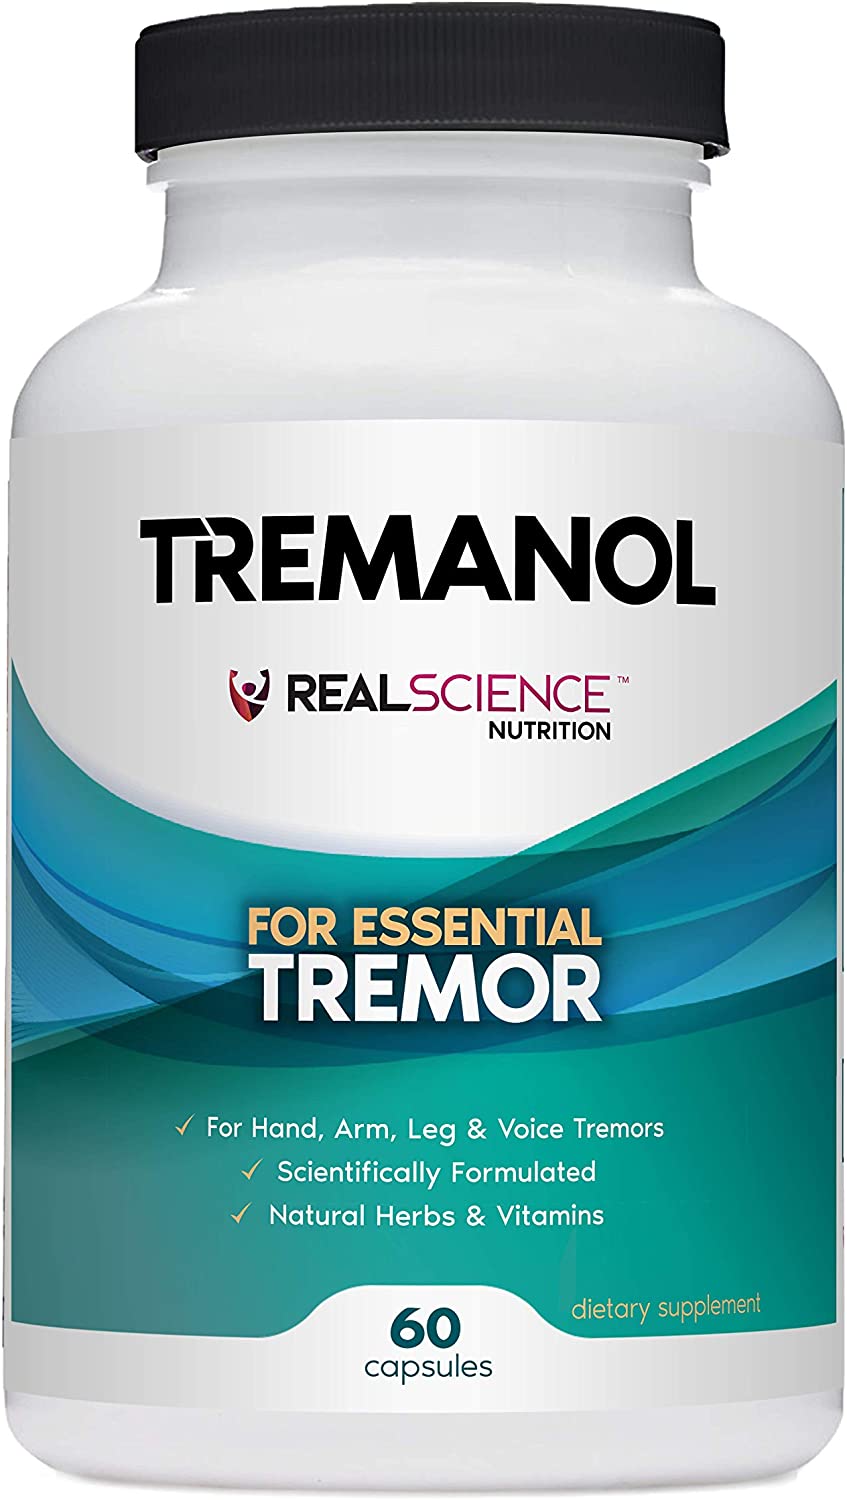 Tremanol – All Natural Essential Tremor Herbal Supplement - May Provide Long-Term Relief for Shaky Hands, Arm, Leg, & Voice Tremors (60 Capsules)